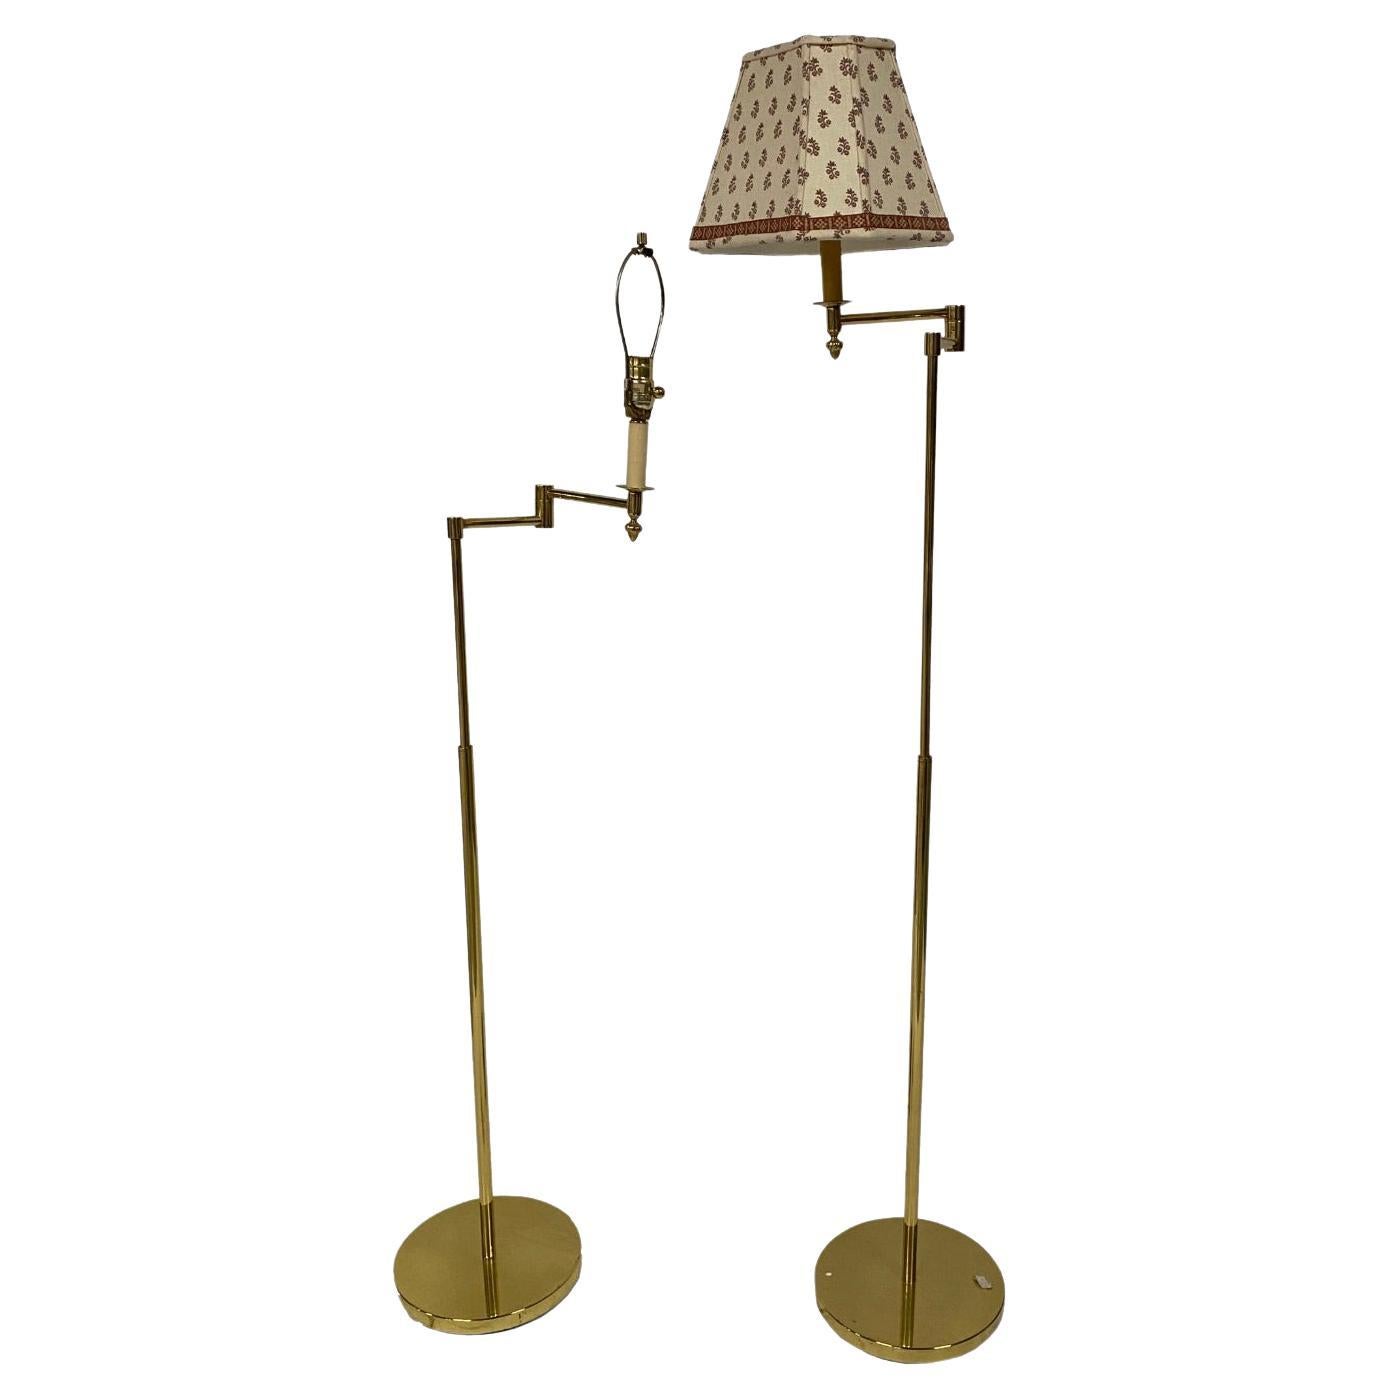 Two Pairs of Vintage Swing Arm Brass Floor Lamps 